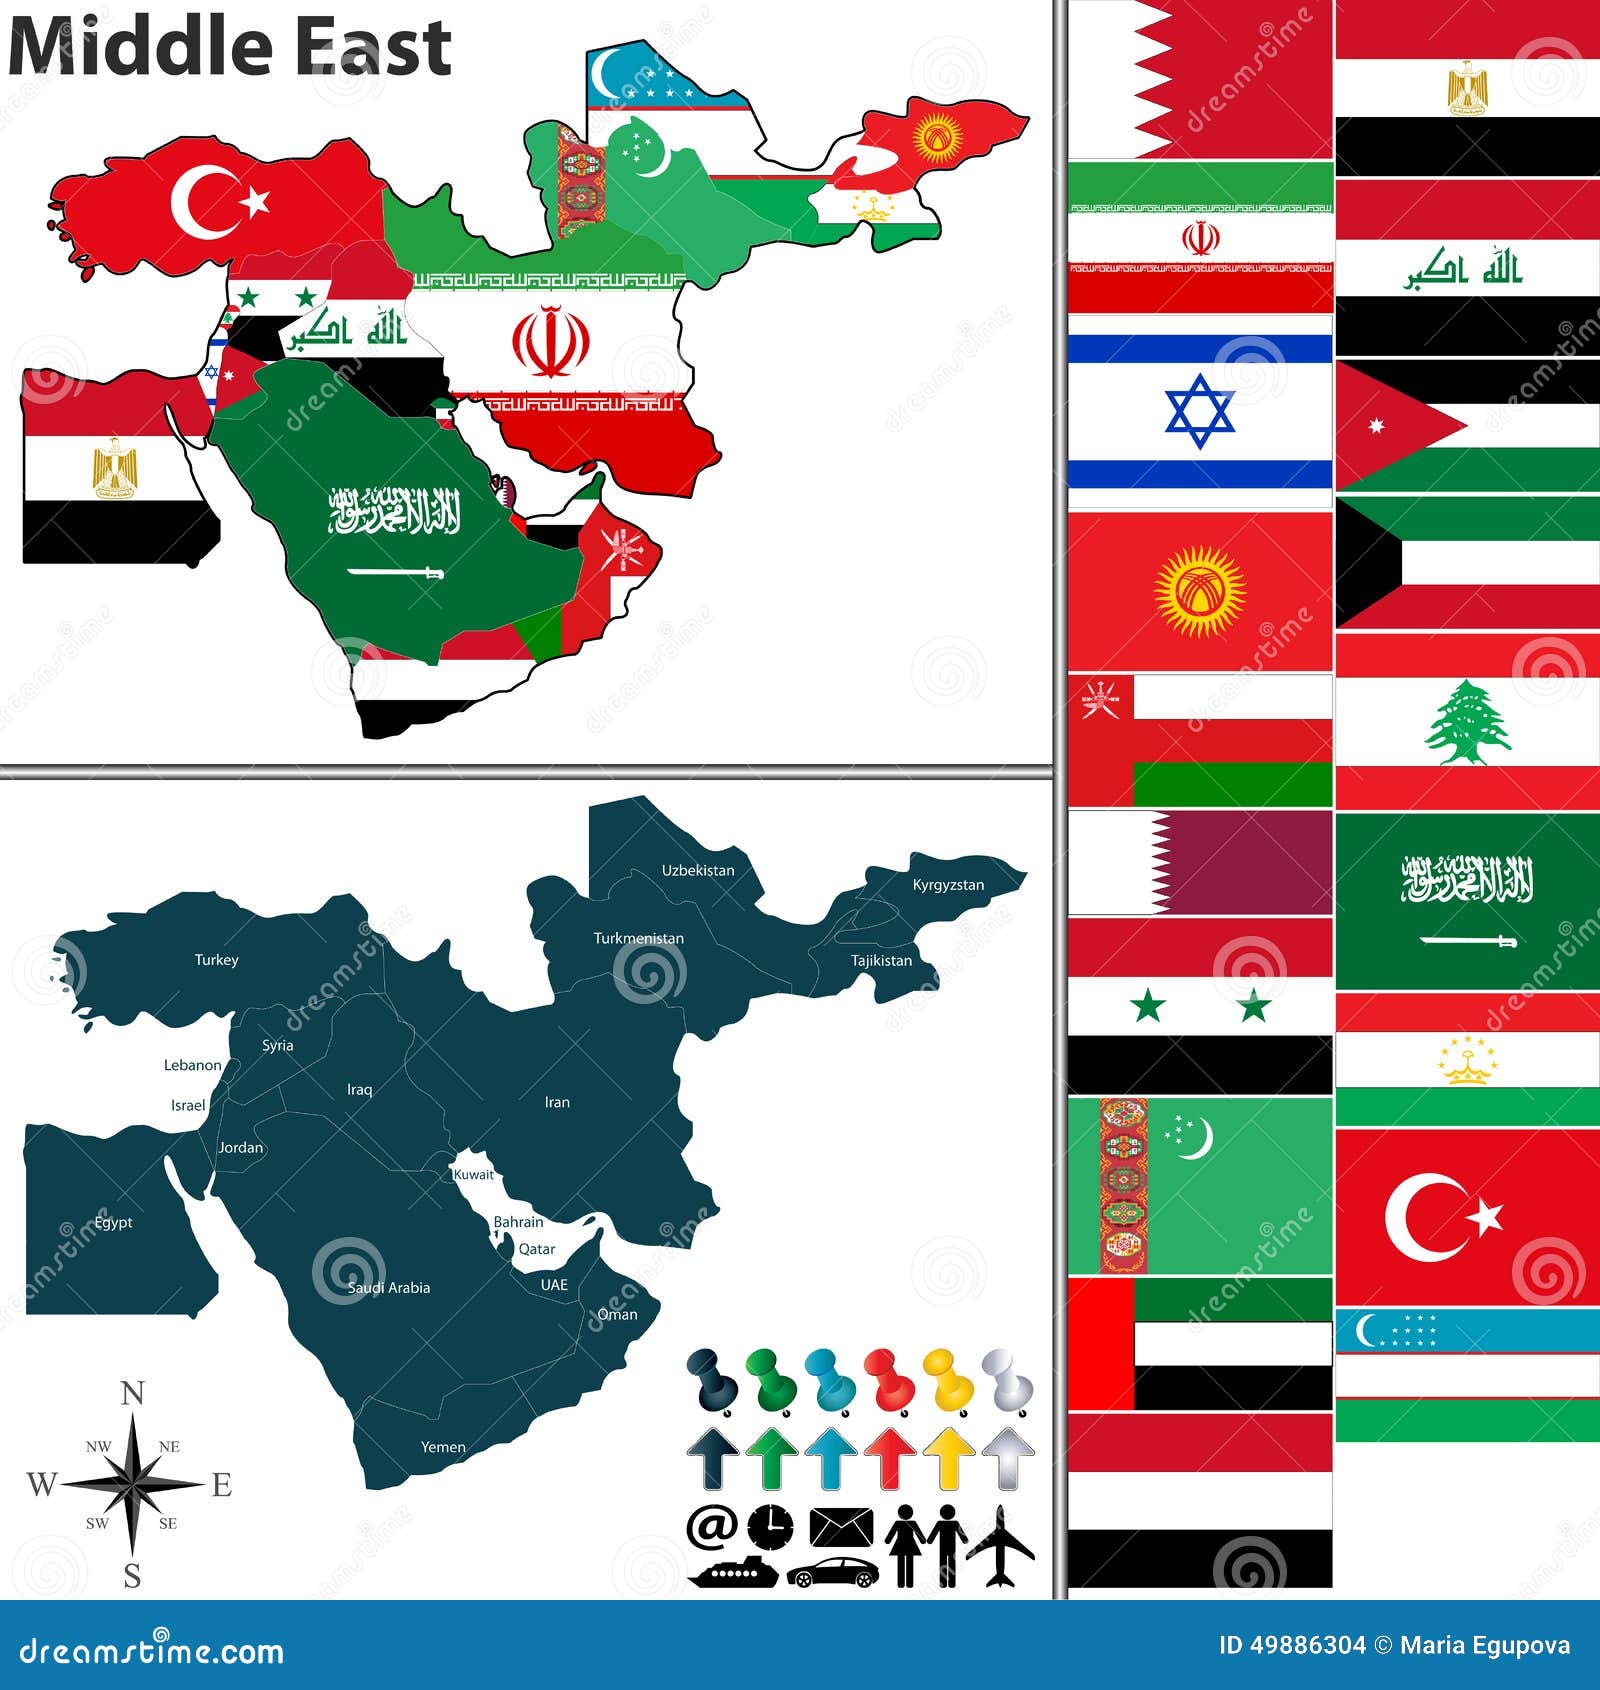 clipart map of middle east - photo #44